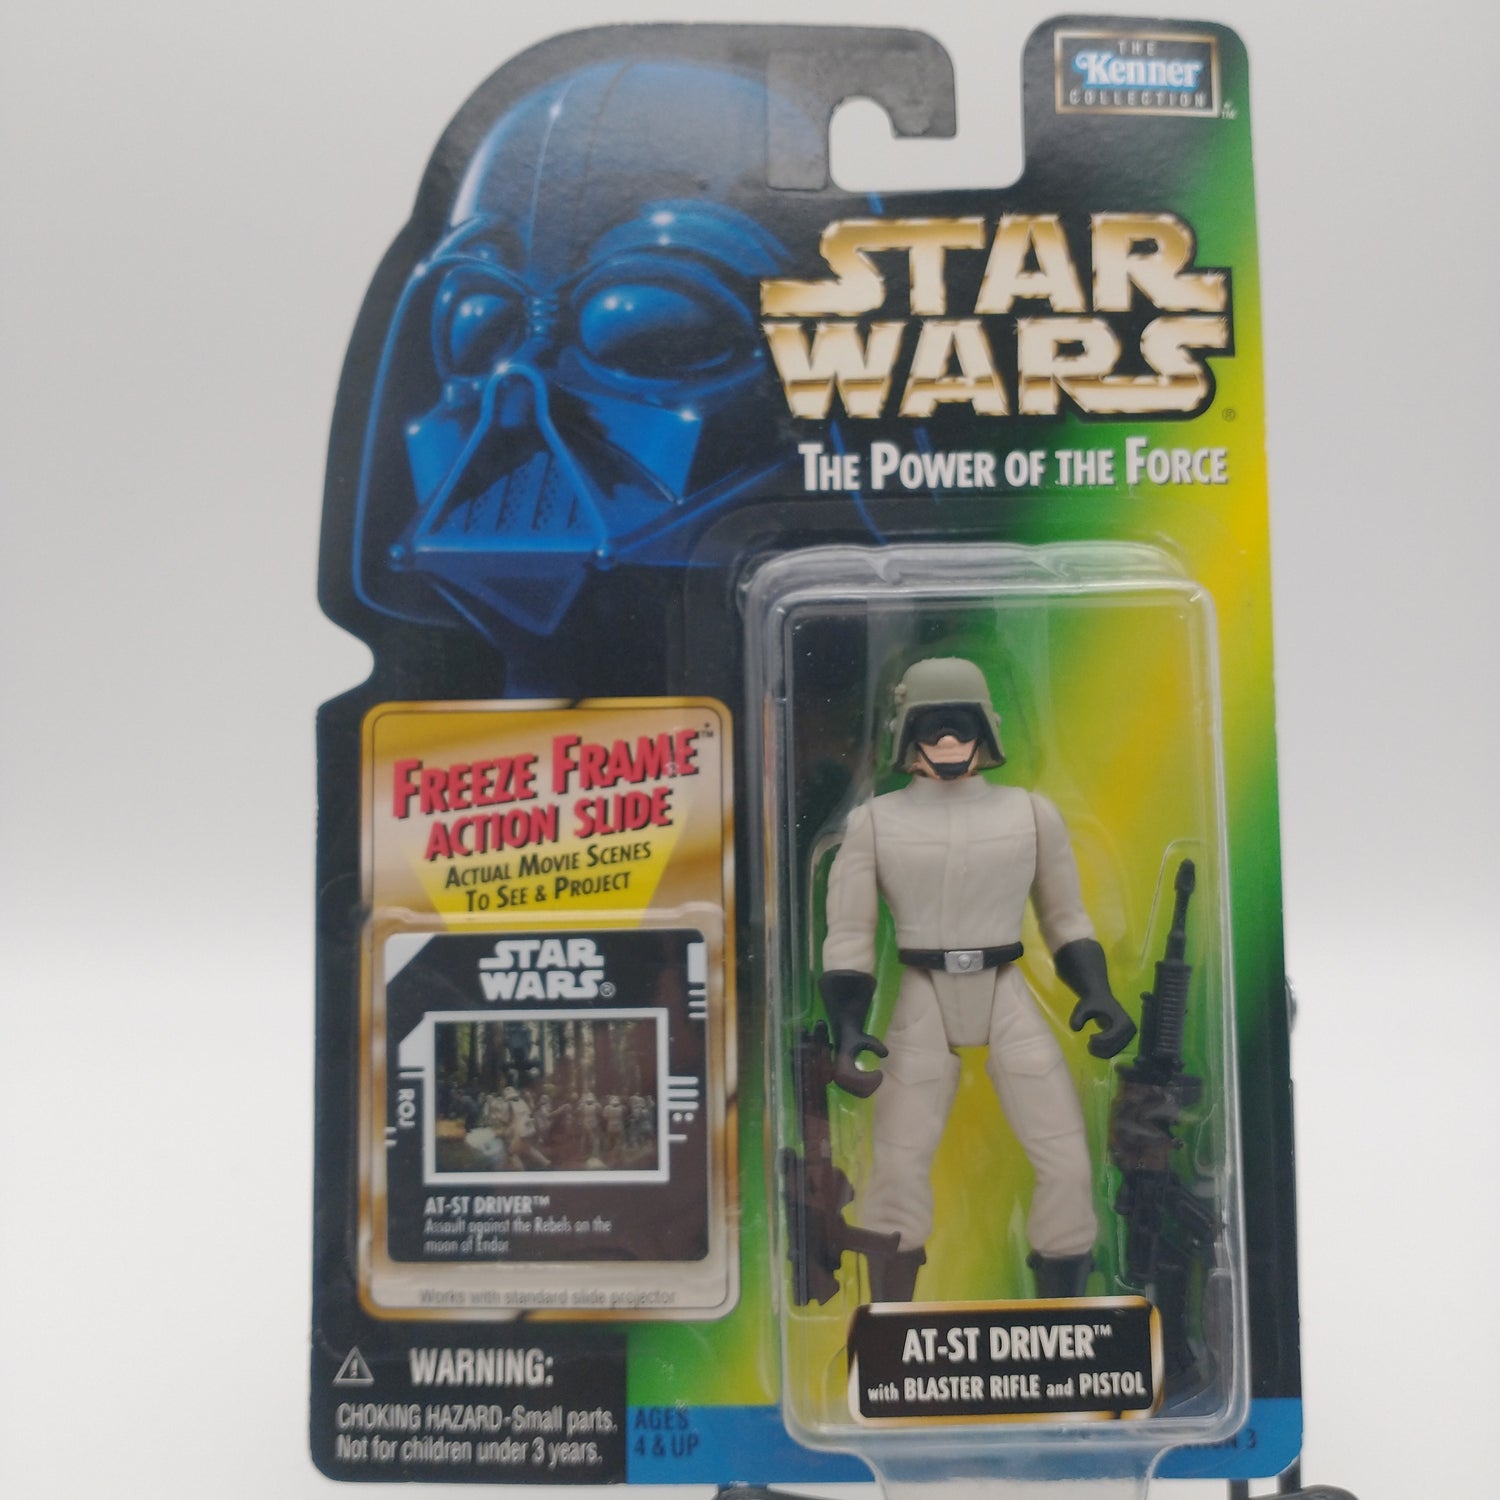 The front of the card and bubble. The action figure inside is wearing a white uniform and a dark grey helmet with sunglasses